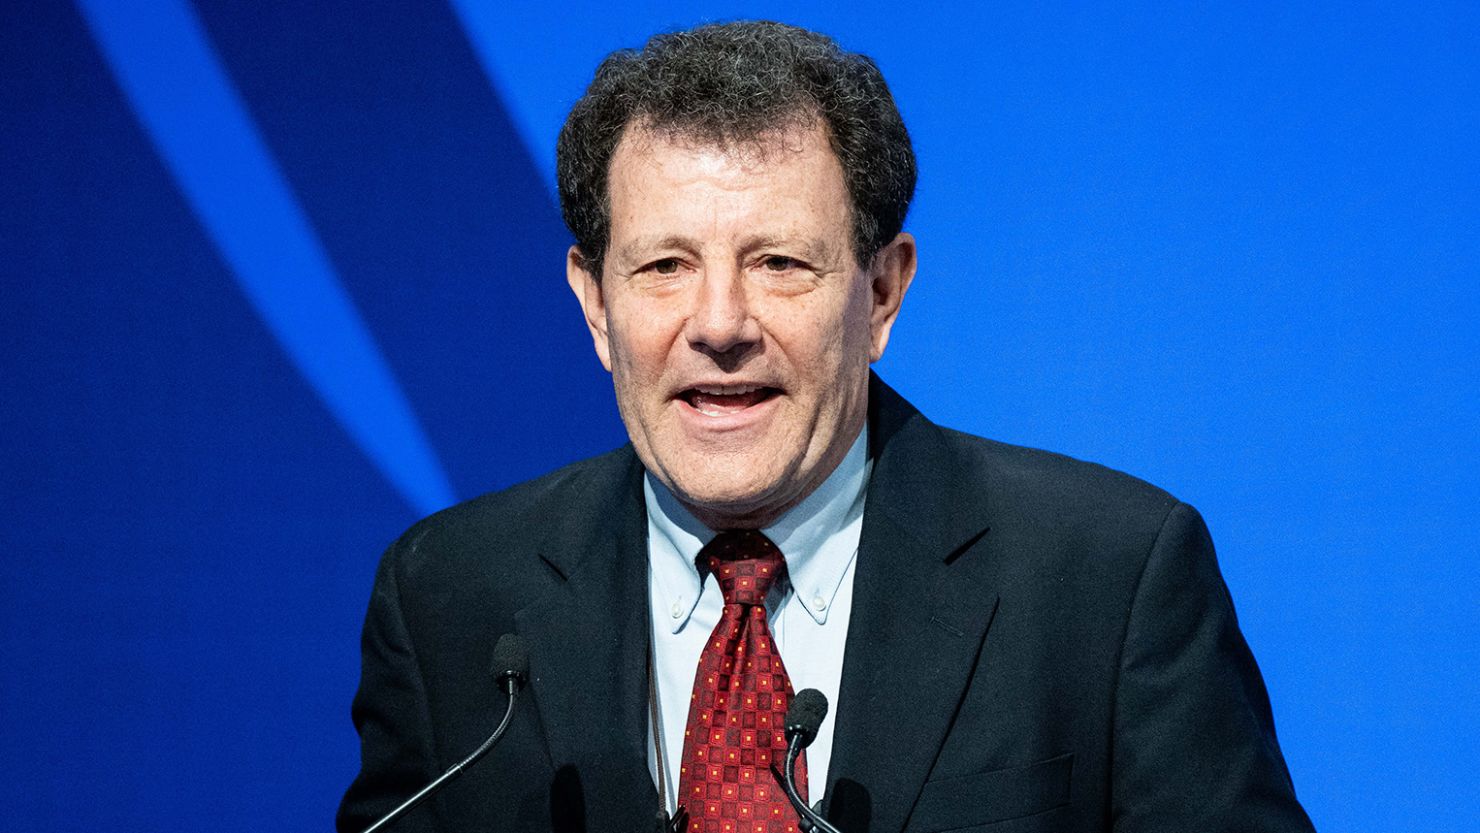 Nicholas Kristof, Pulitzer Prize-winning journalist and author, said the American press must not "dispassionately observe our way to authoritarianism."